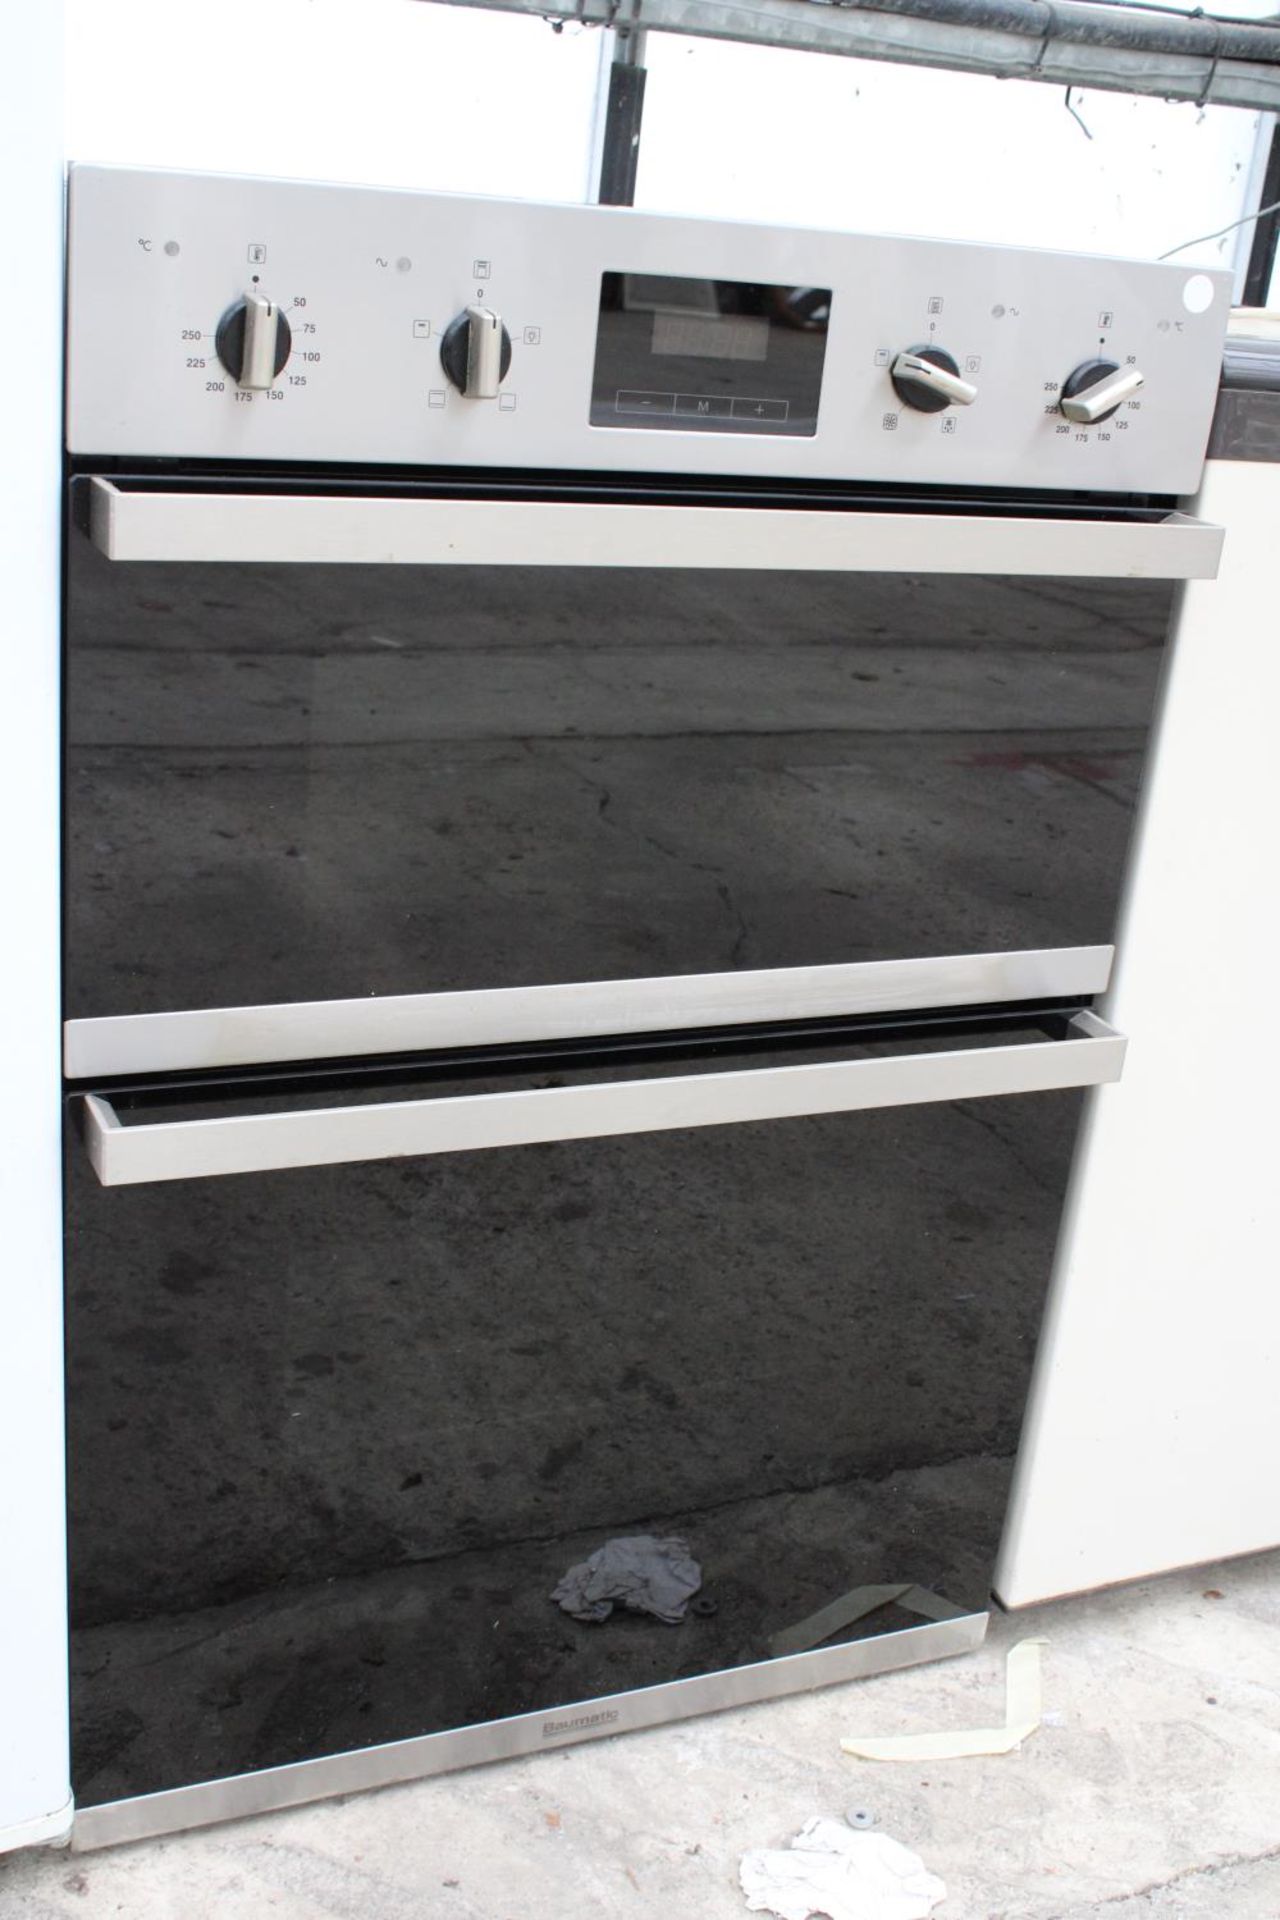 A CHROME AND BLACK BAUMATIC INTERGRATED DOUBLE OVEN - Bild 2 aus 4